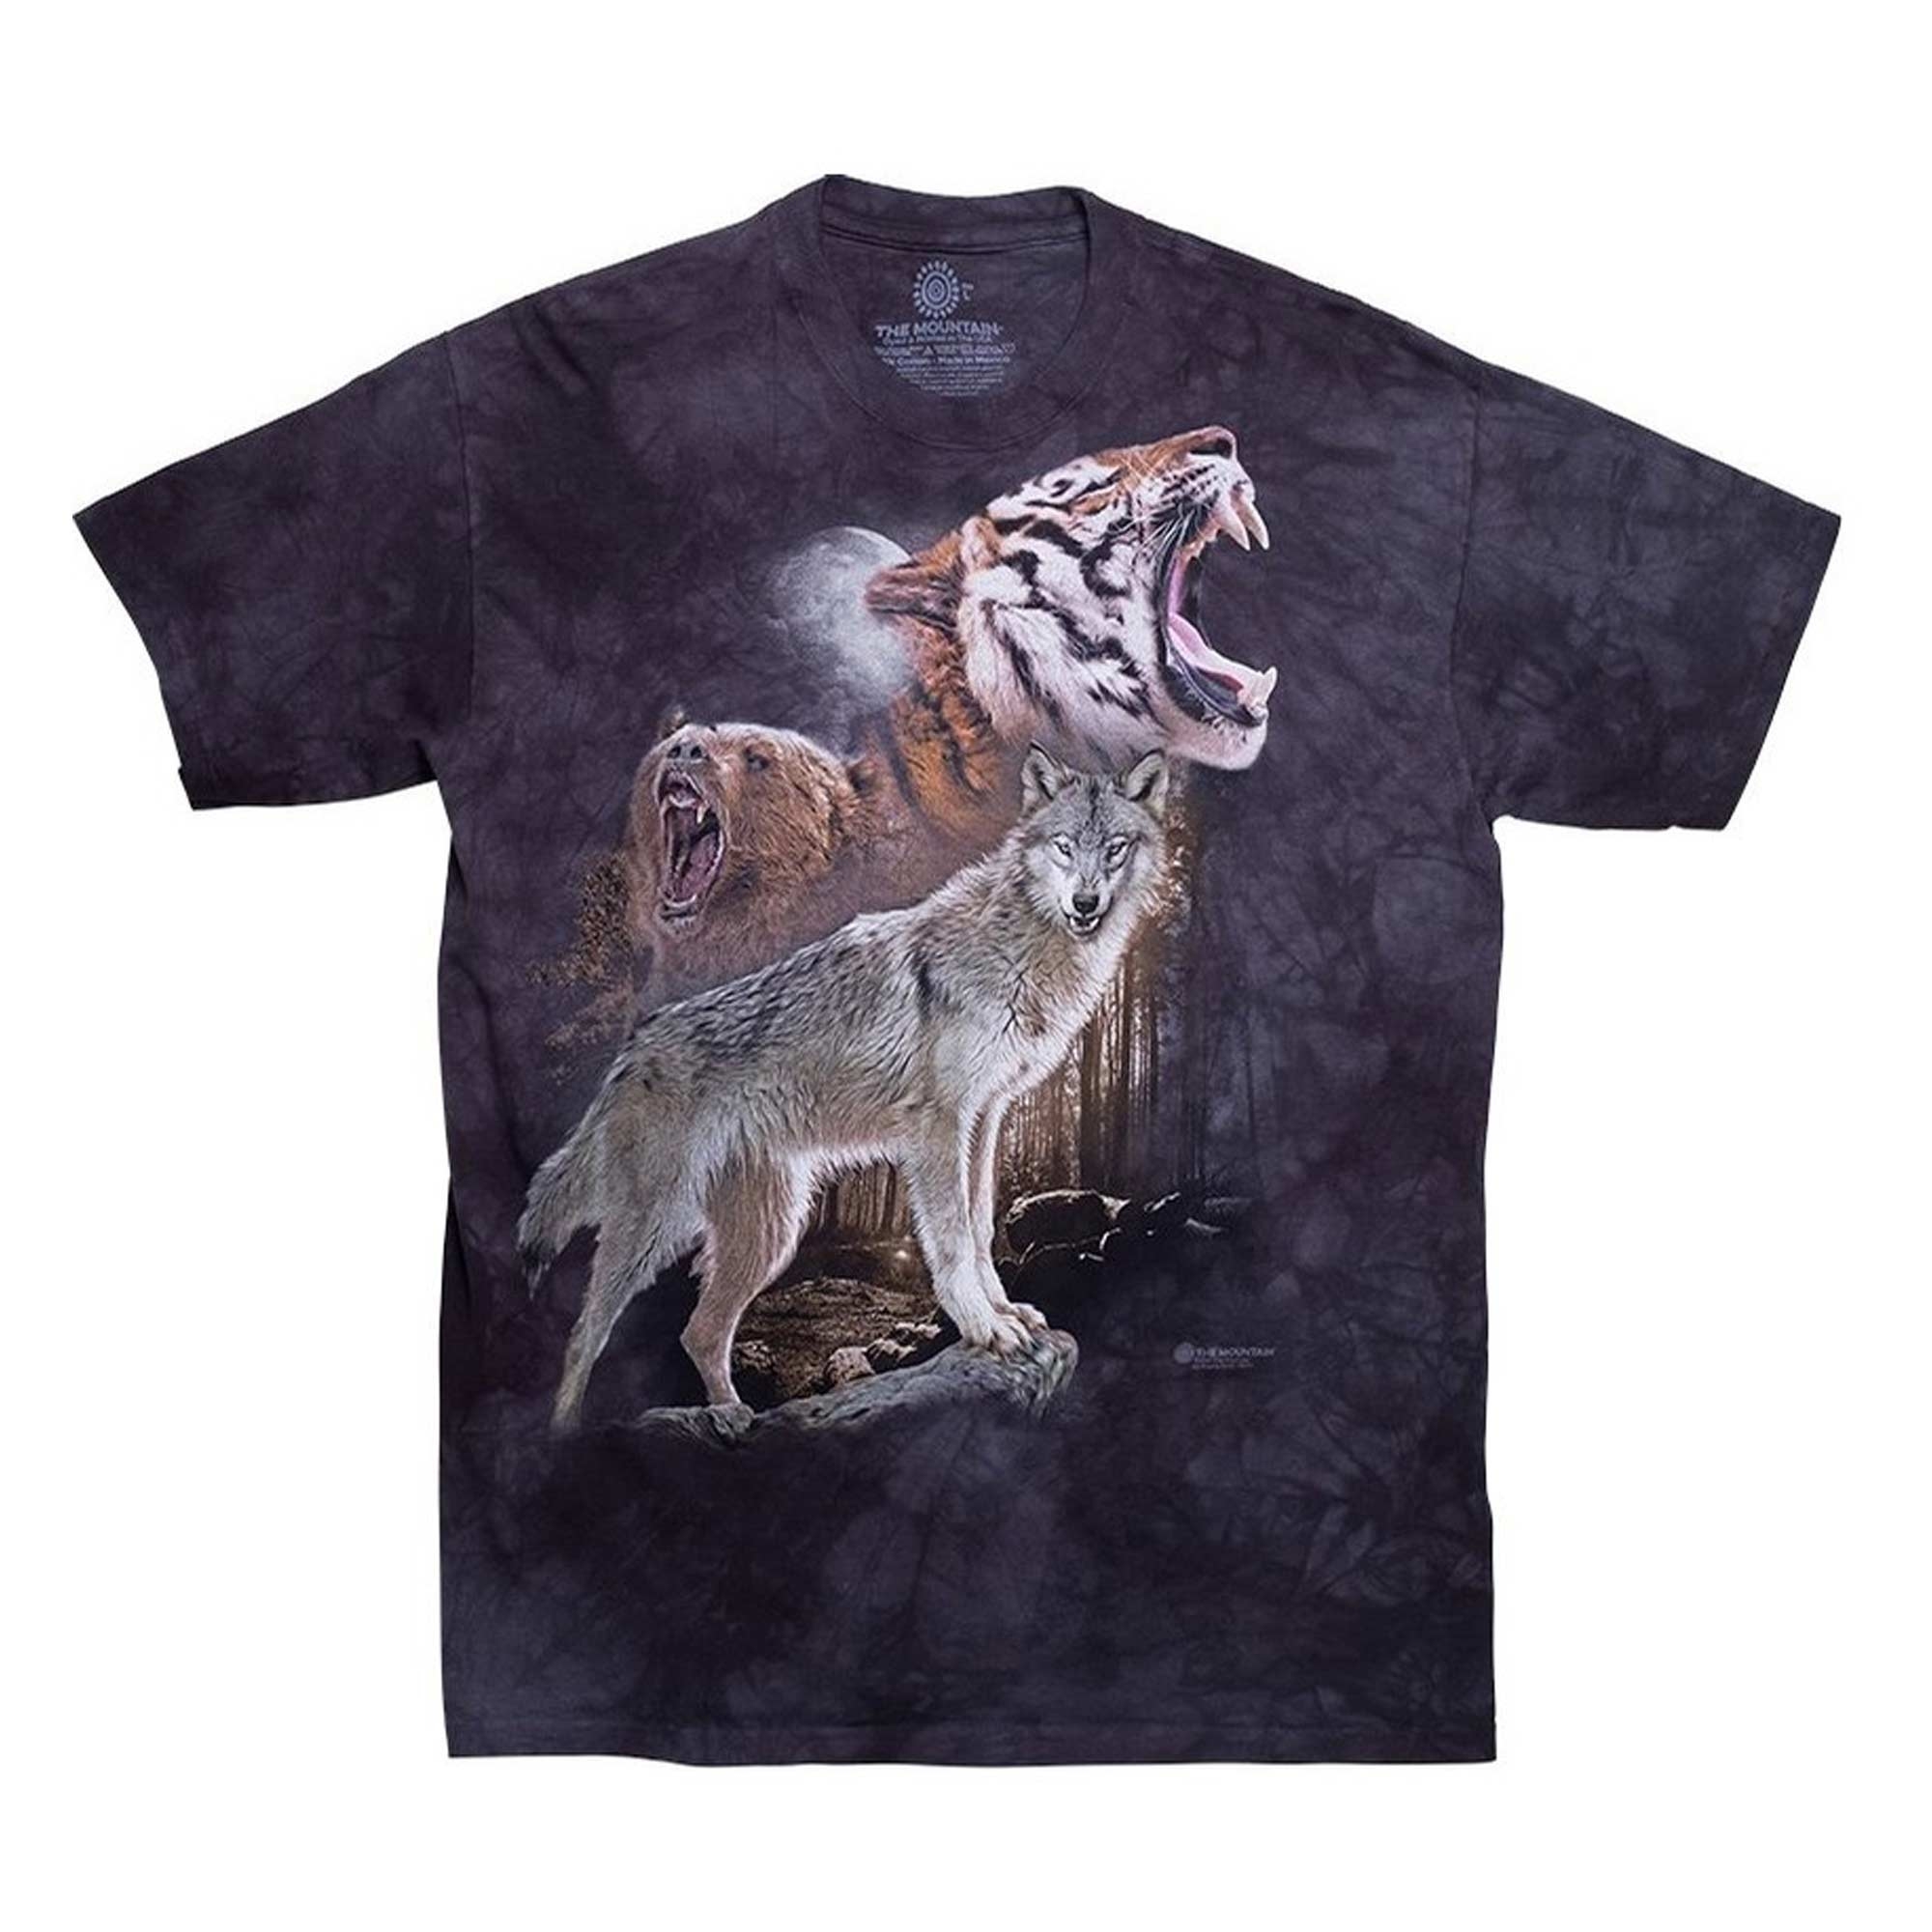 ALTAMONT T-Shirt NEEN x THE MOUNTAIN S/S black wash